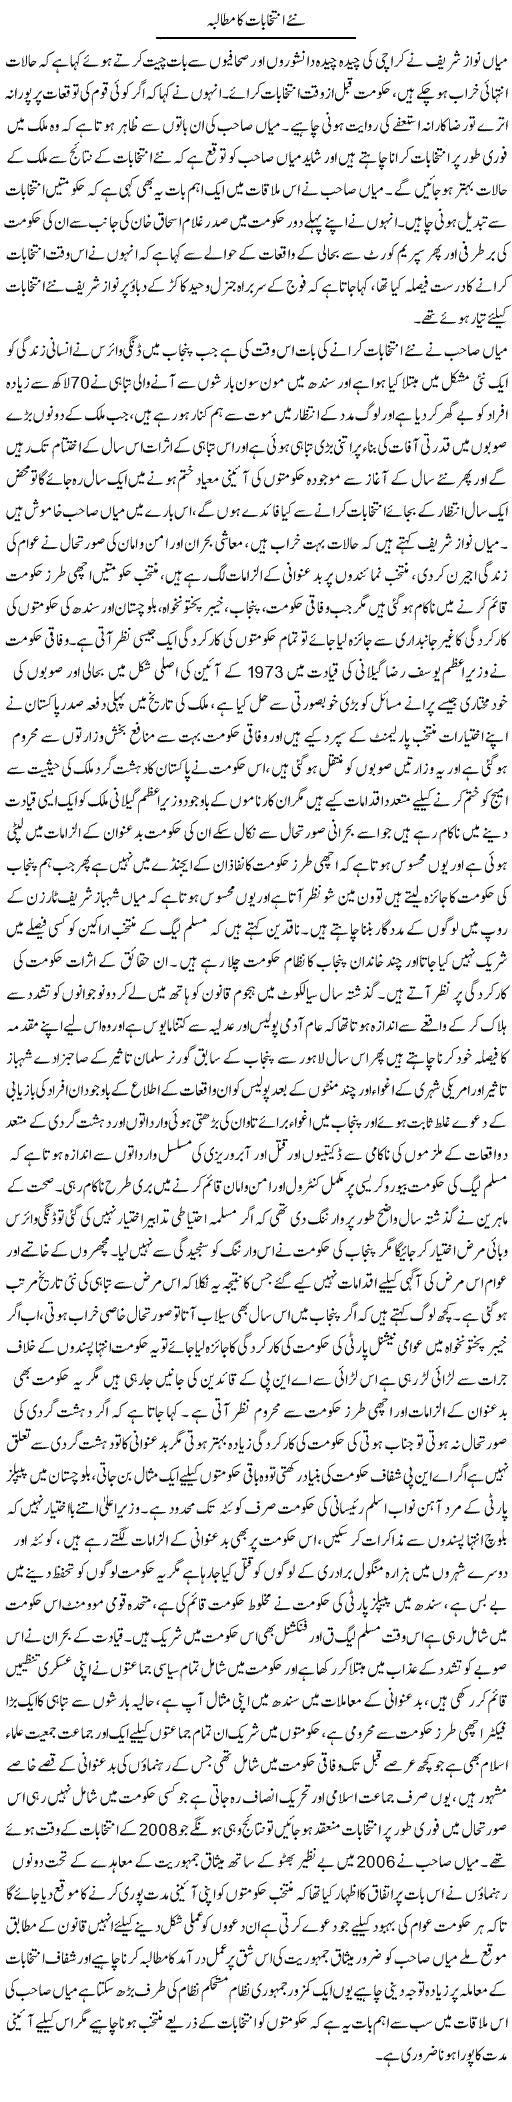 New Elections Express Column Tauseef Ahmed 24 September 2011